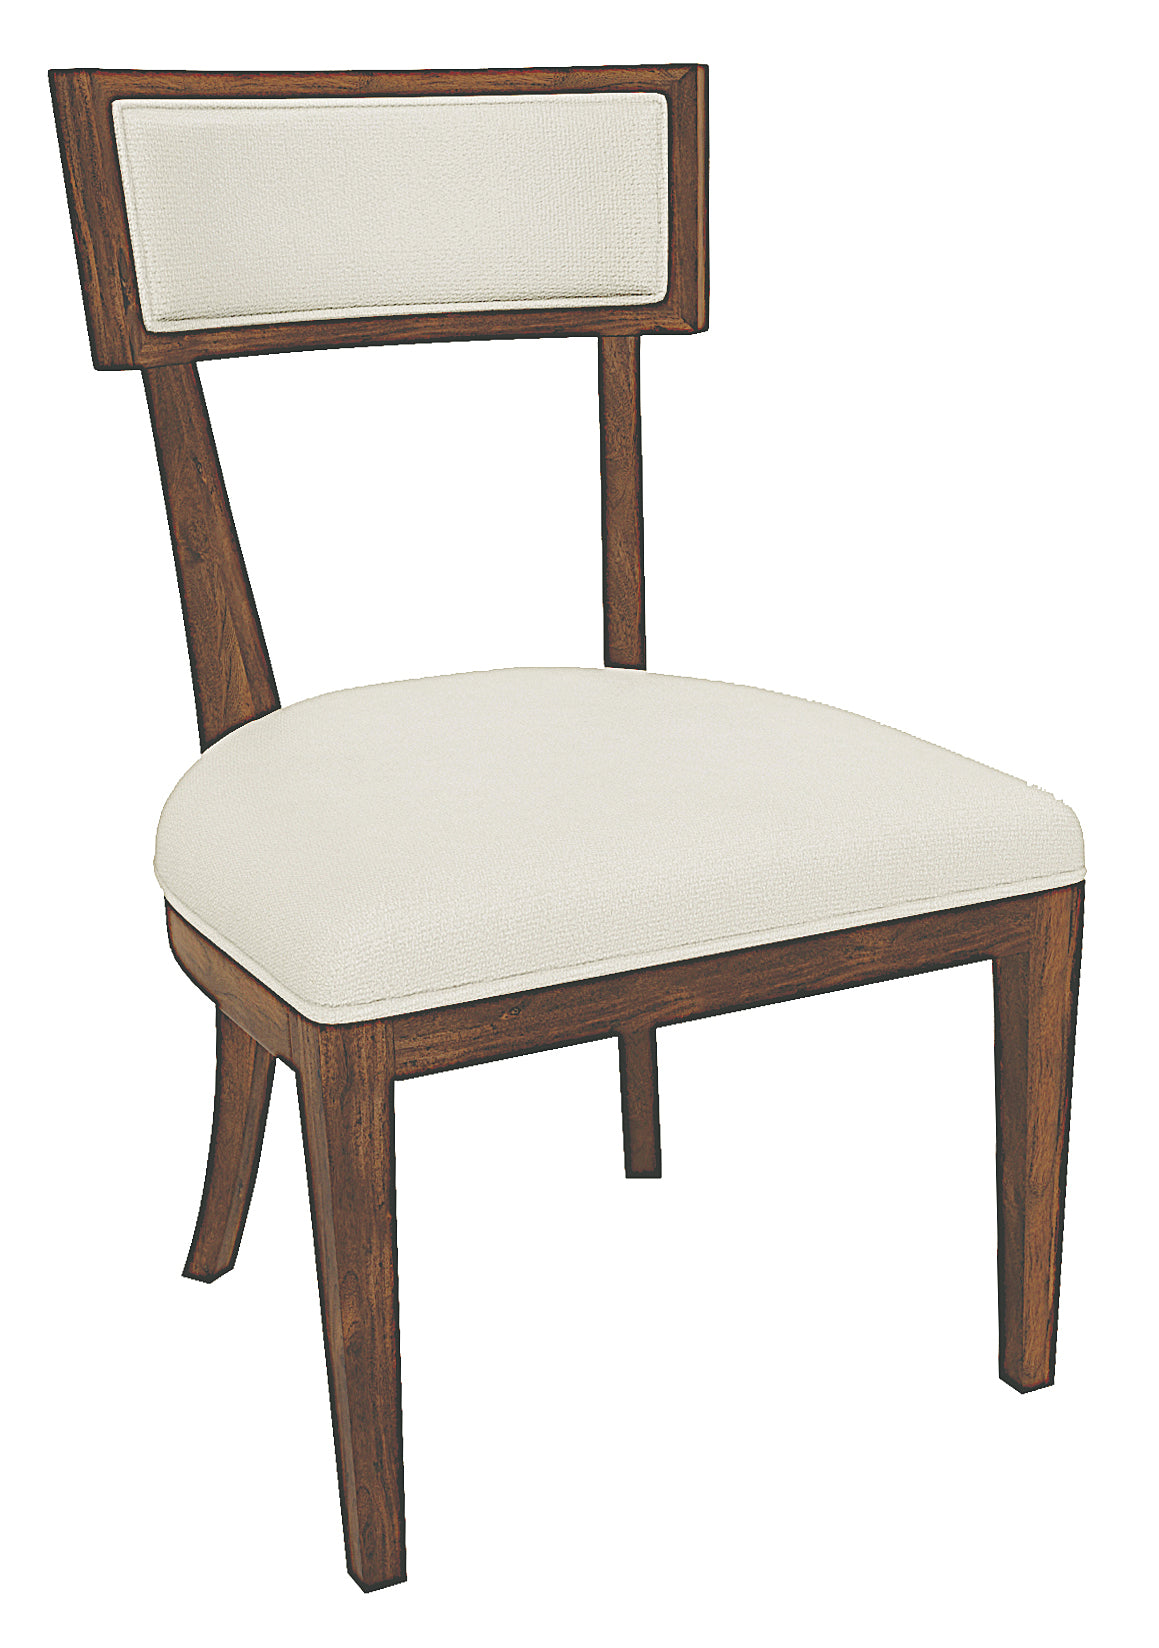 Hekman 26023 Bedford Park 22in. x 24in. x 36in. Dining Side Chair